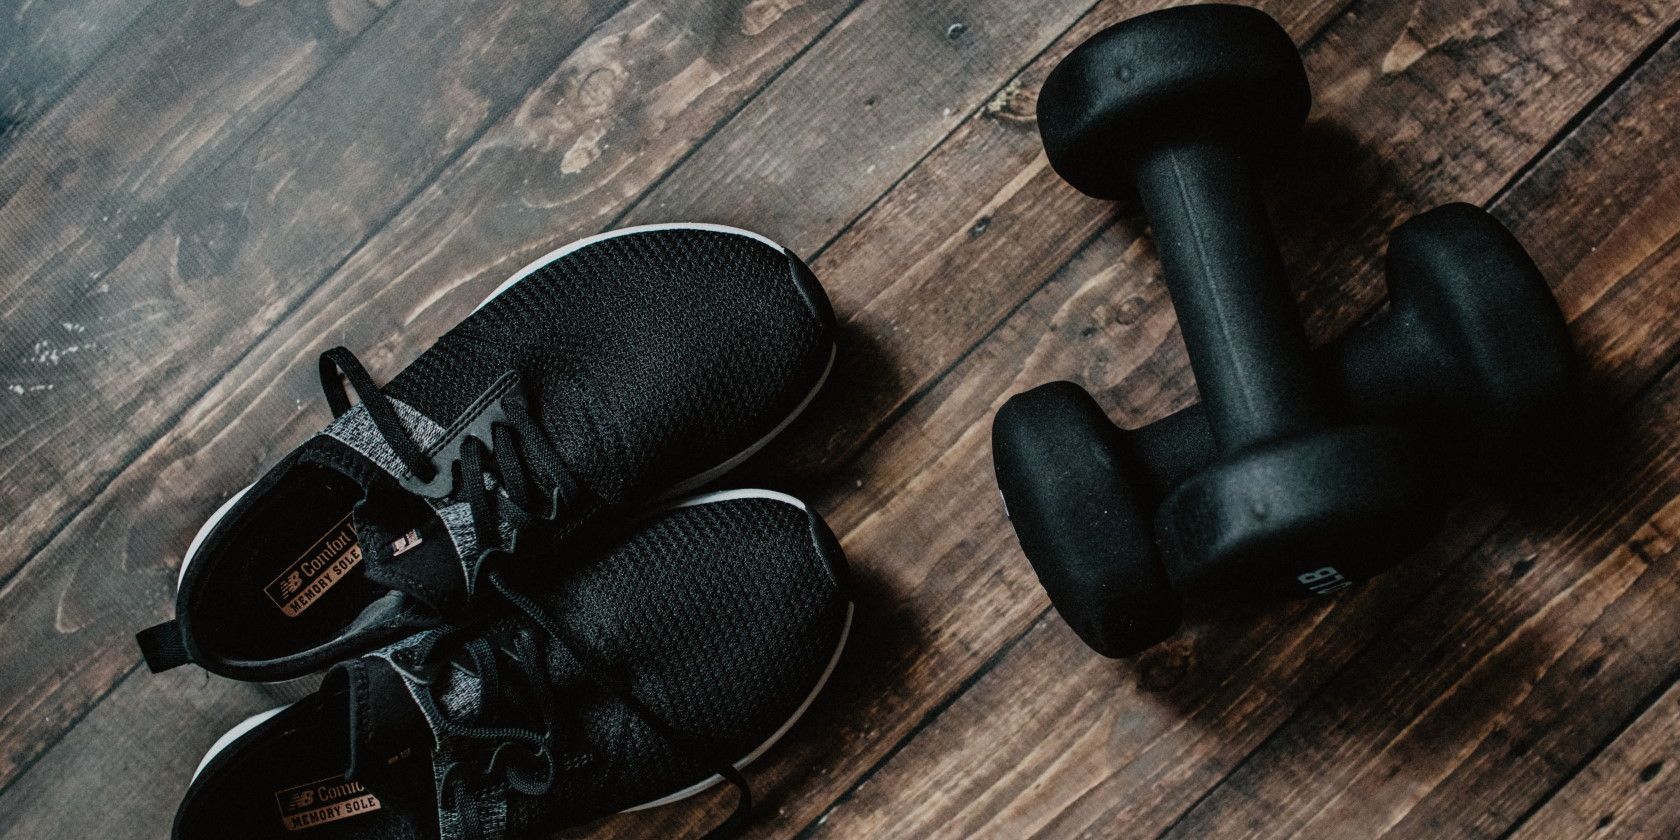 pair of black running shoes next to small black set of dumbbells